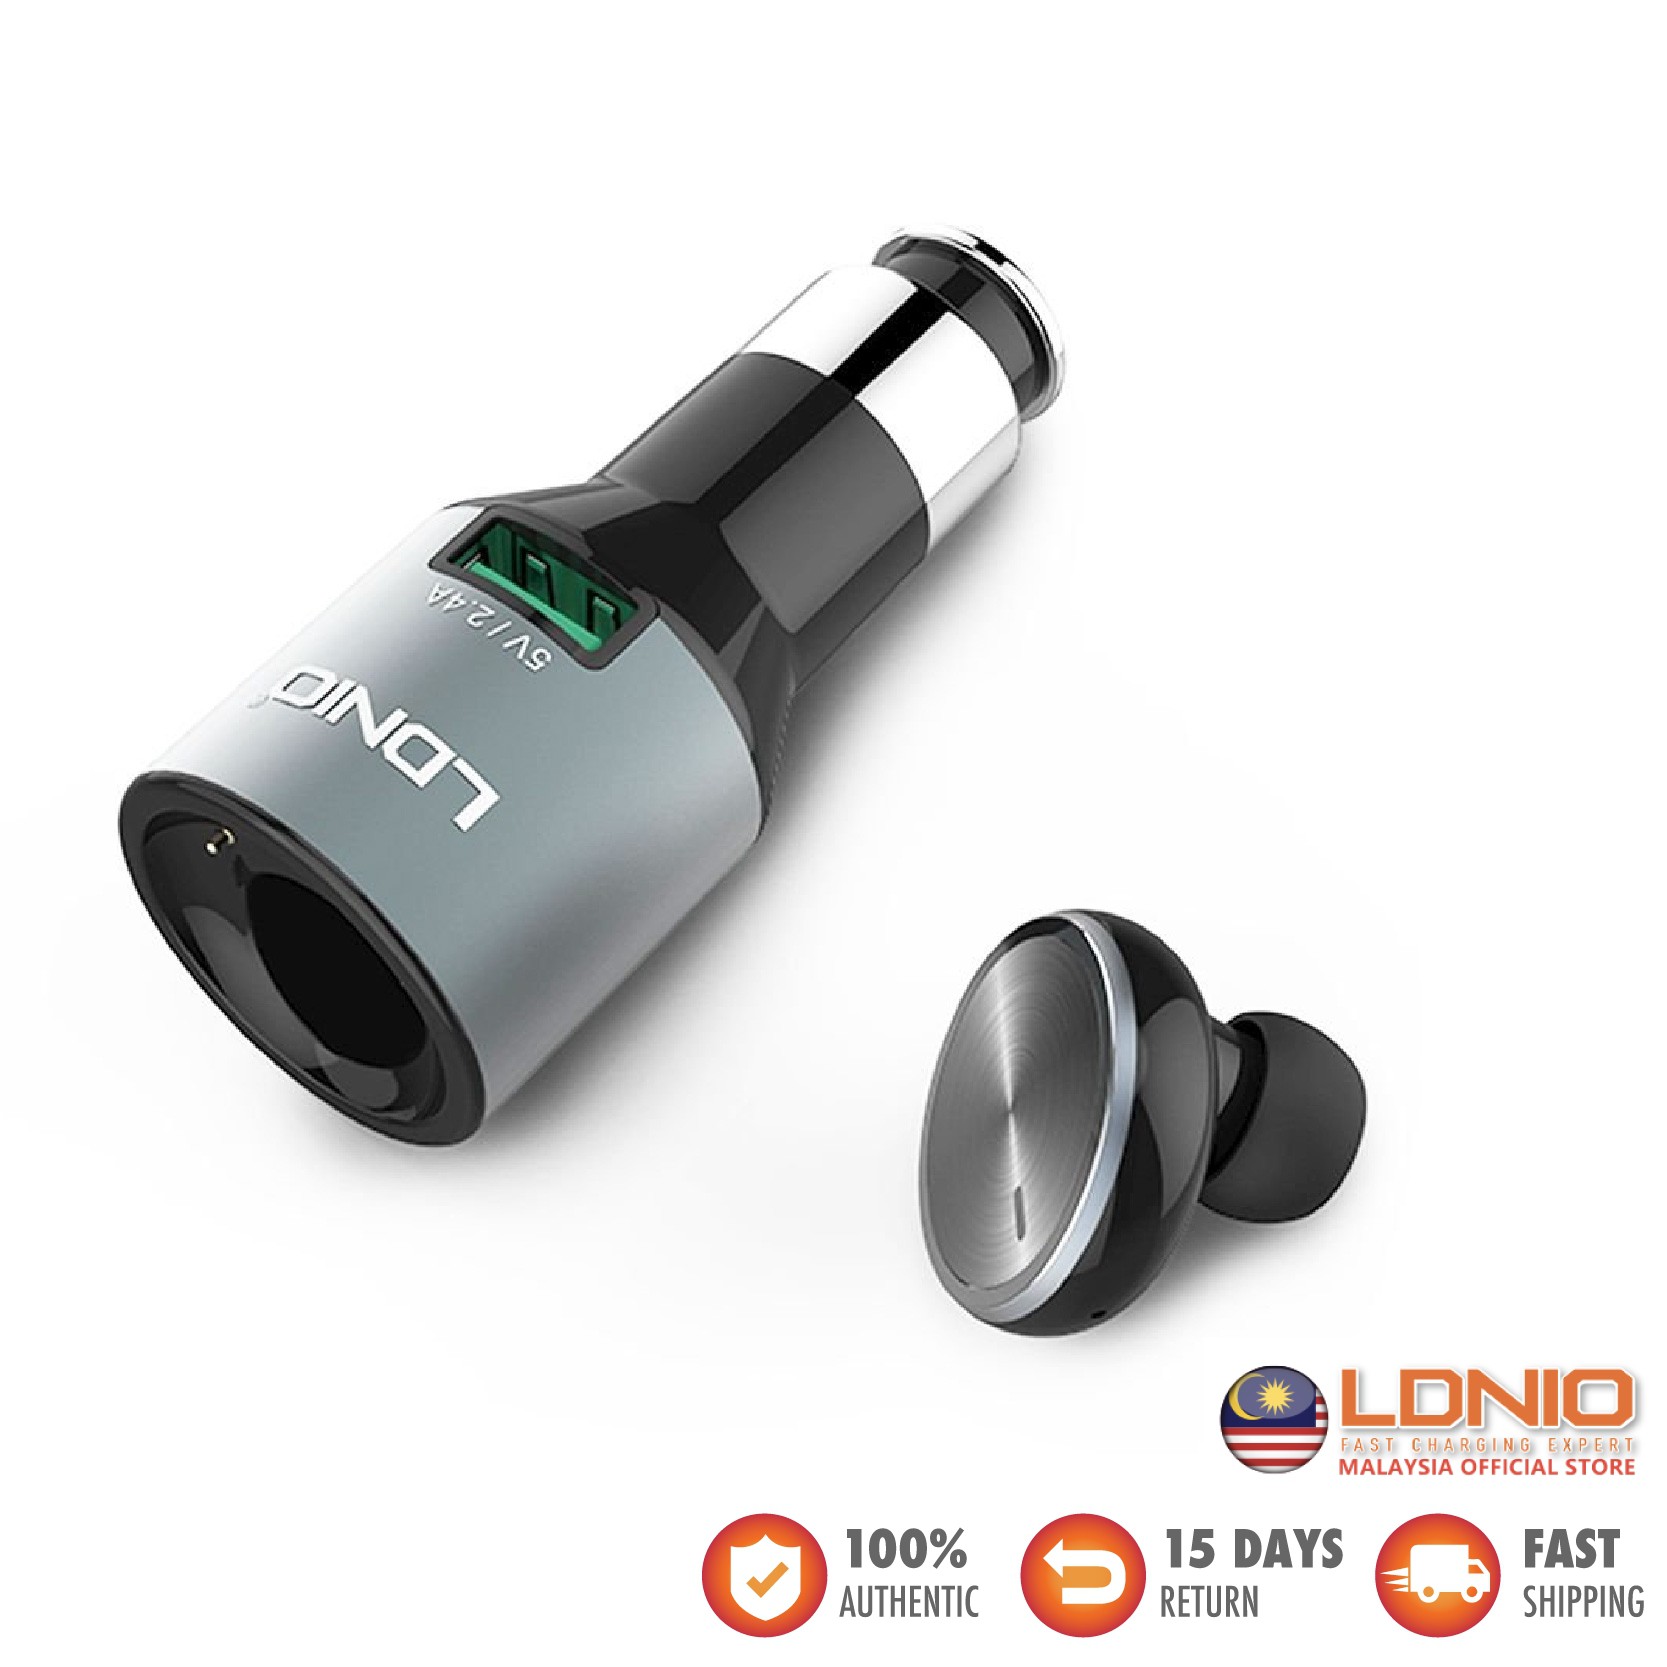 LDNIO CM20 Mono Bluetooth v4.0 Headset with Auto ID USB Car Charger (2.4A)